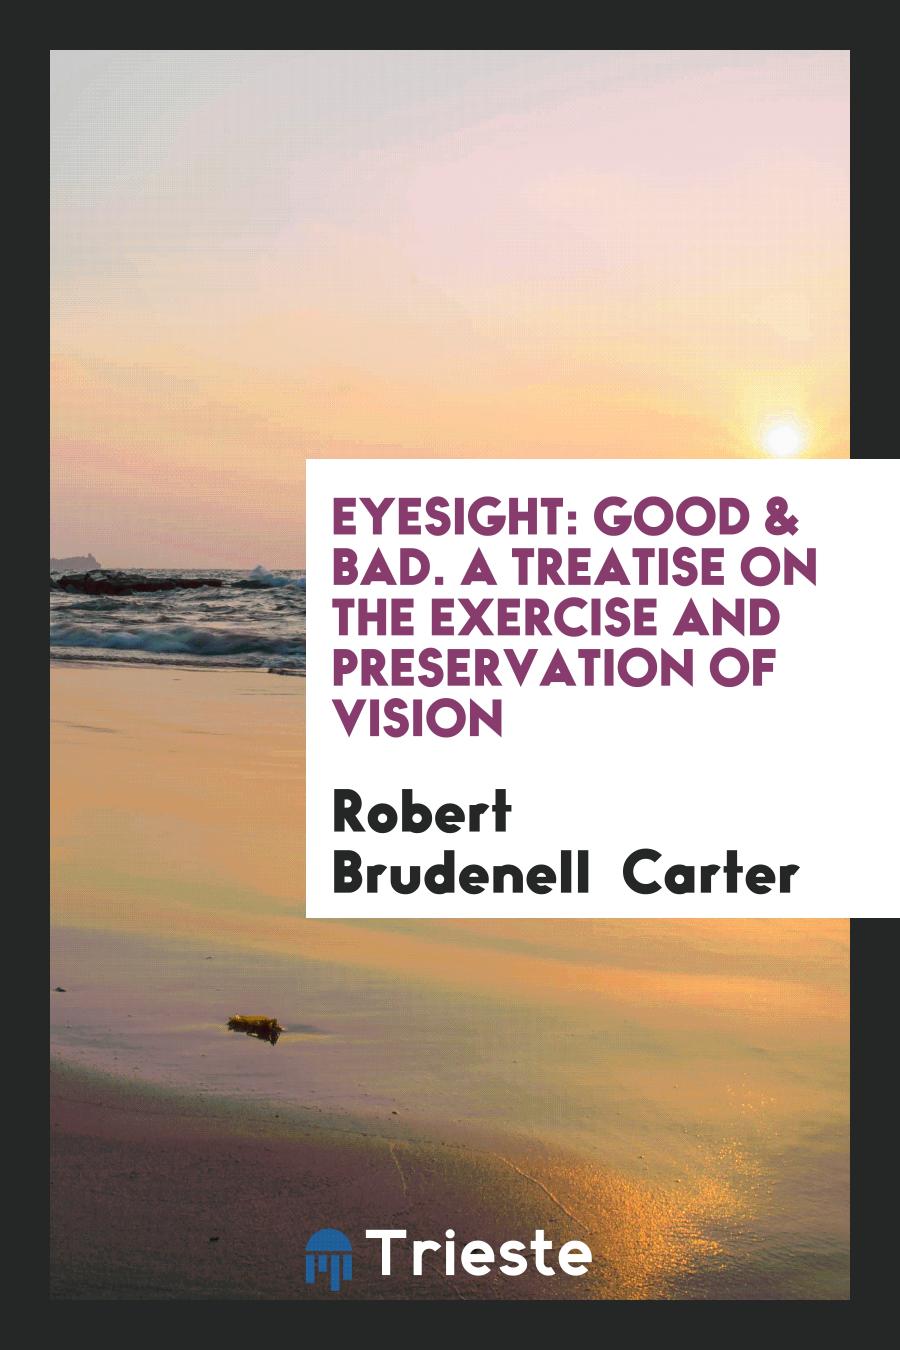 Eyesight: Good & Bad. A Treatise on the Exercise and Preservation of Vision